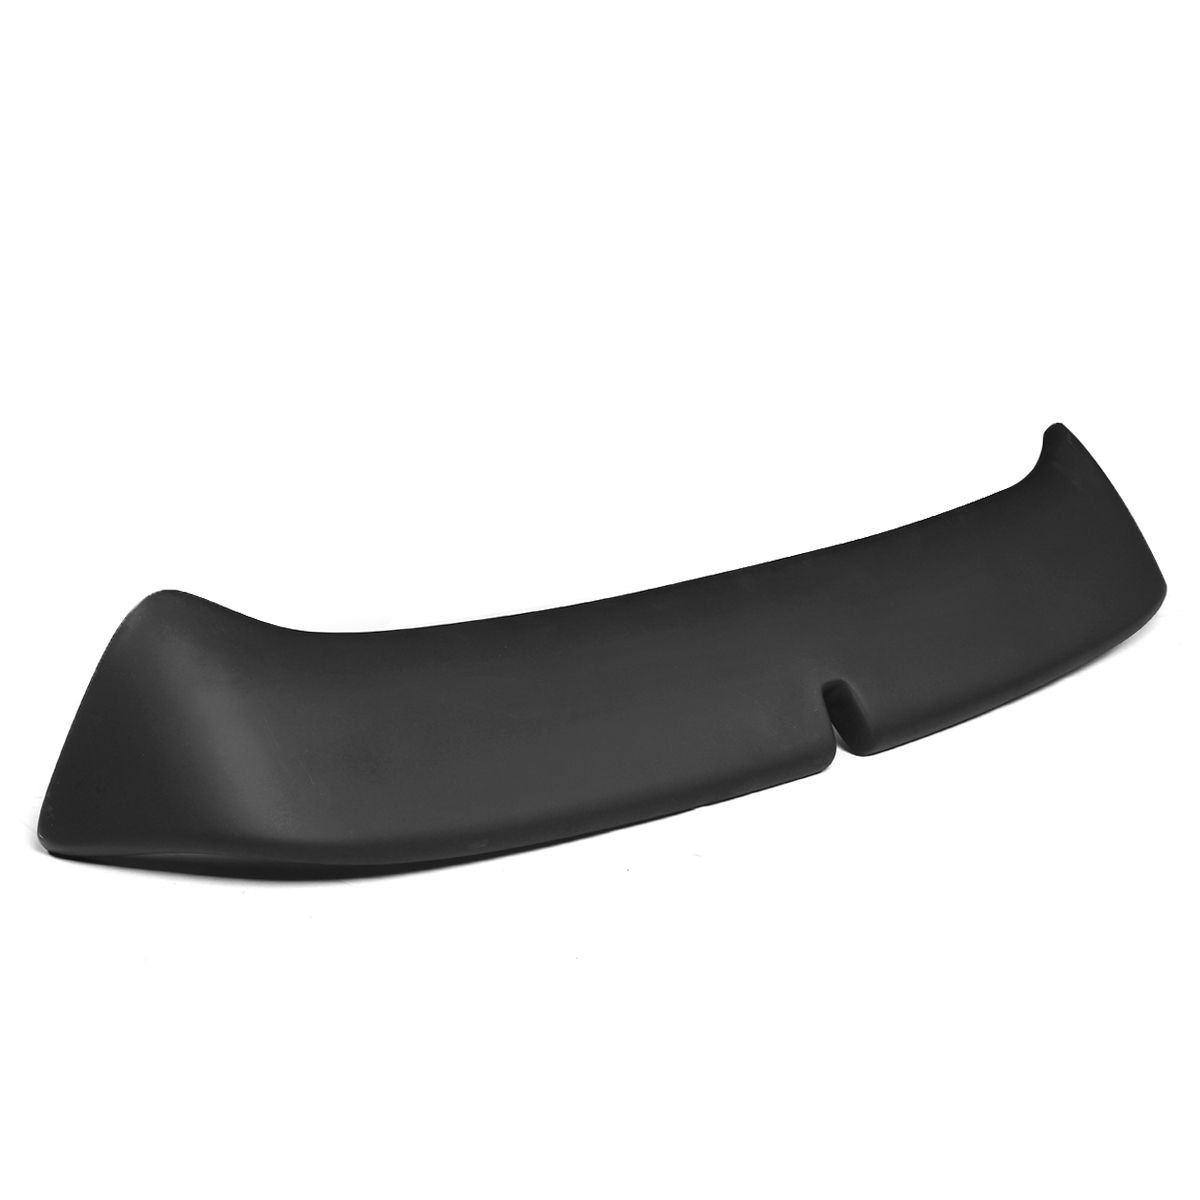 ABS-Unpainted-Black-Car-Rear-Roof-Spoiler-Wing-Lip-For-VW-Golf-MK4-IV-1578472